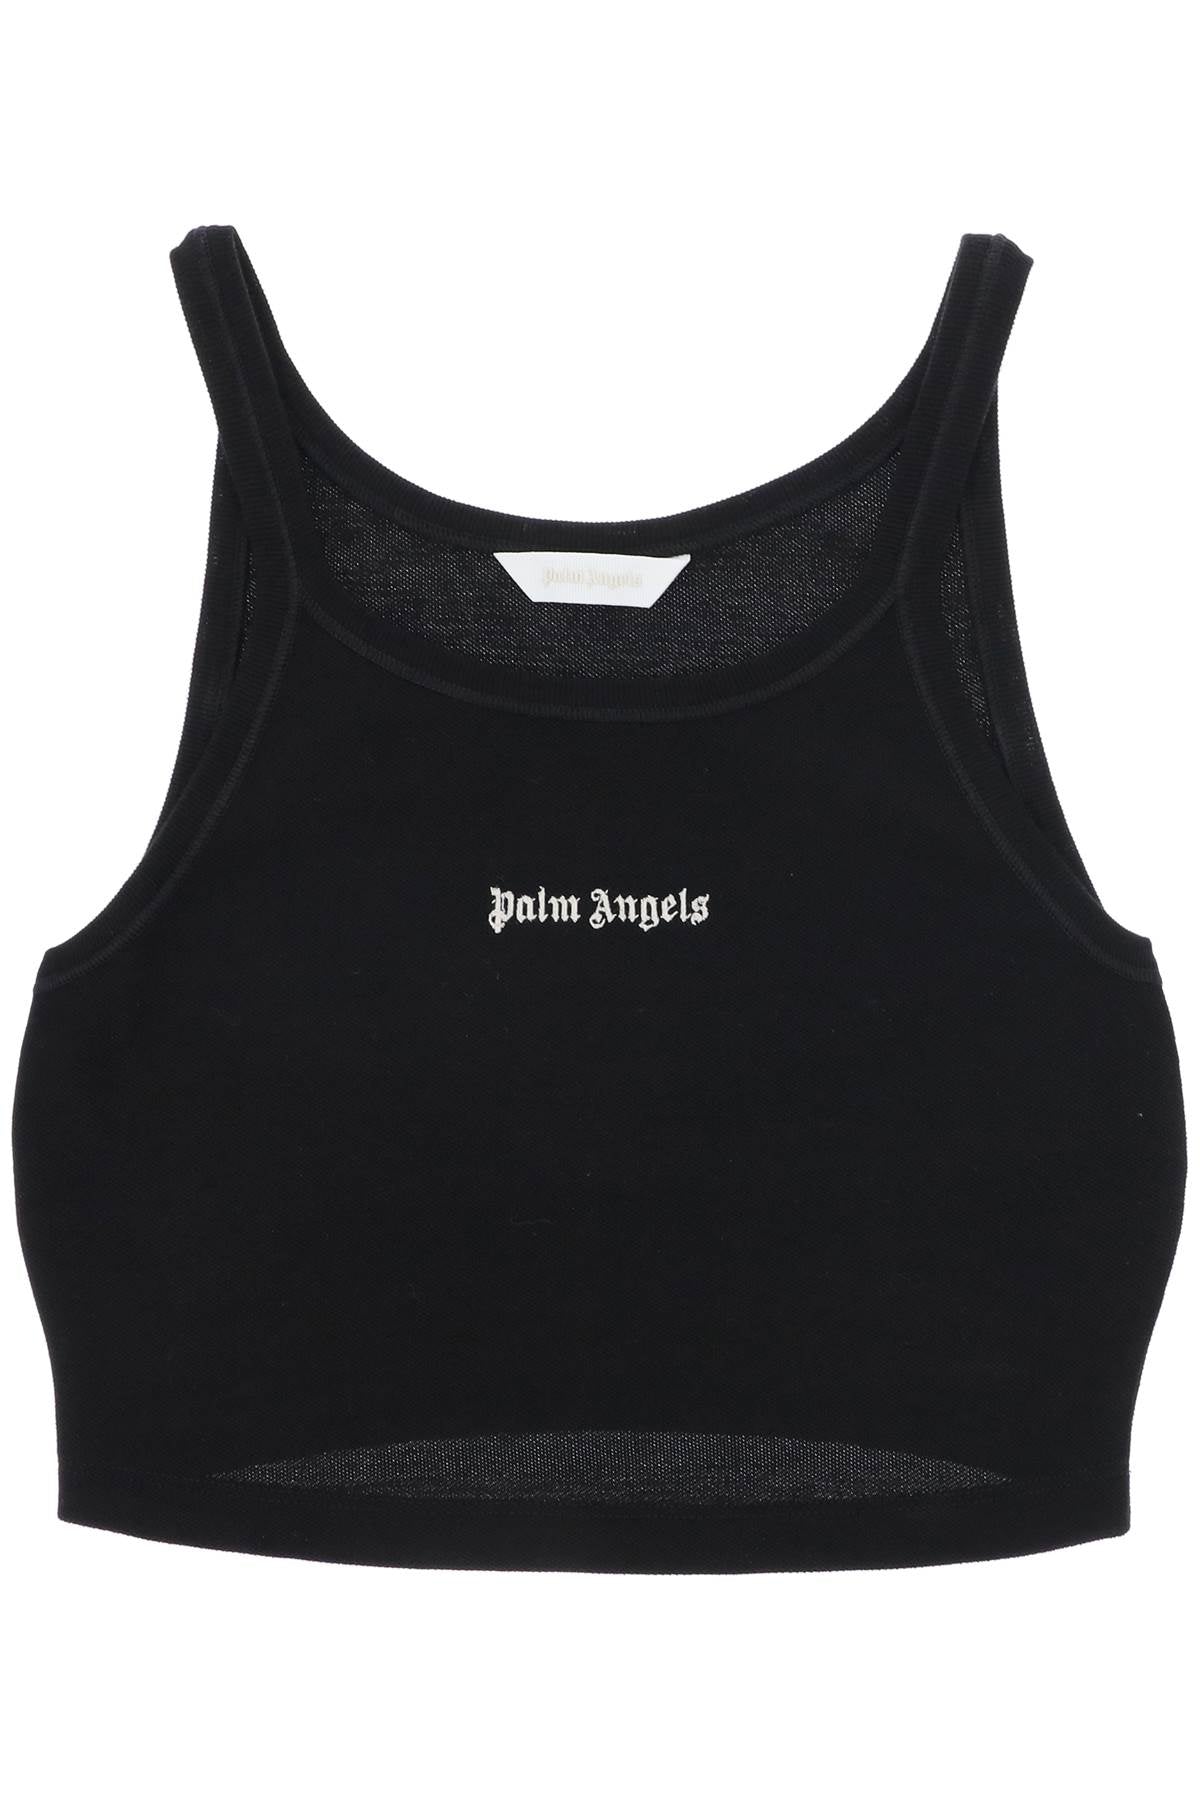 Palm angels embroidered logo crop top with-0